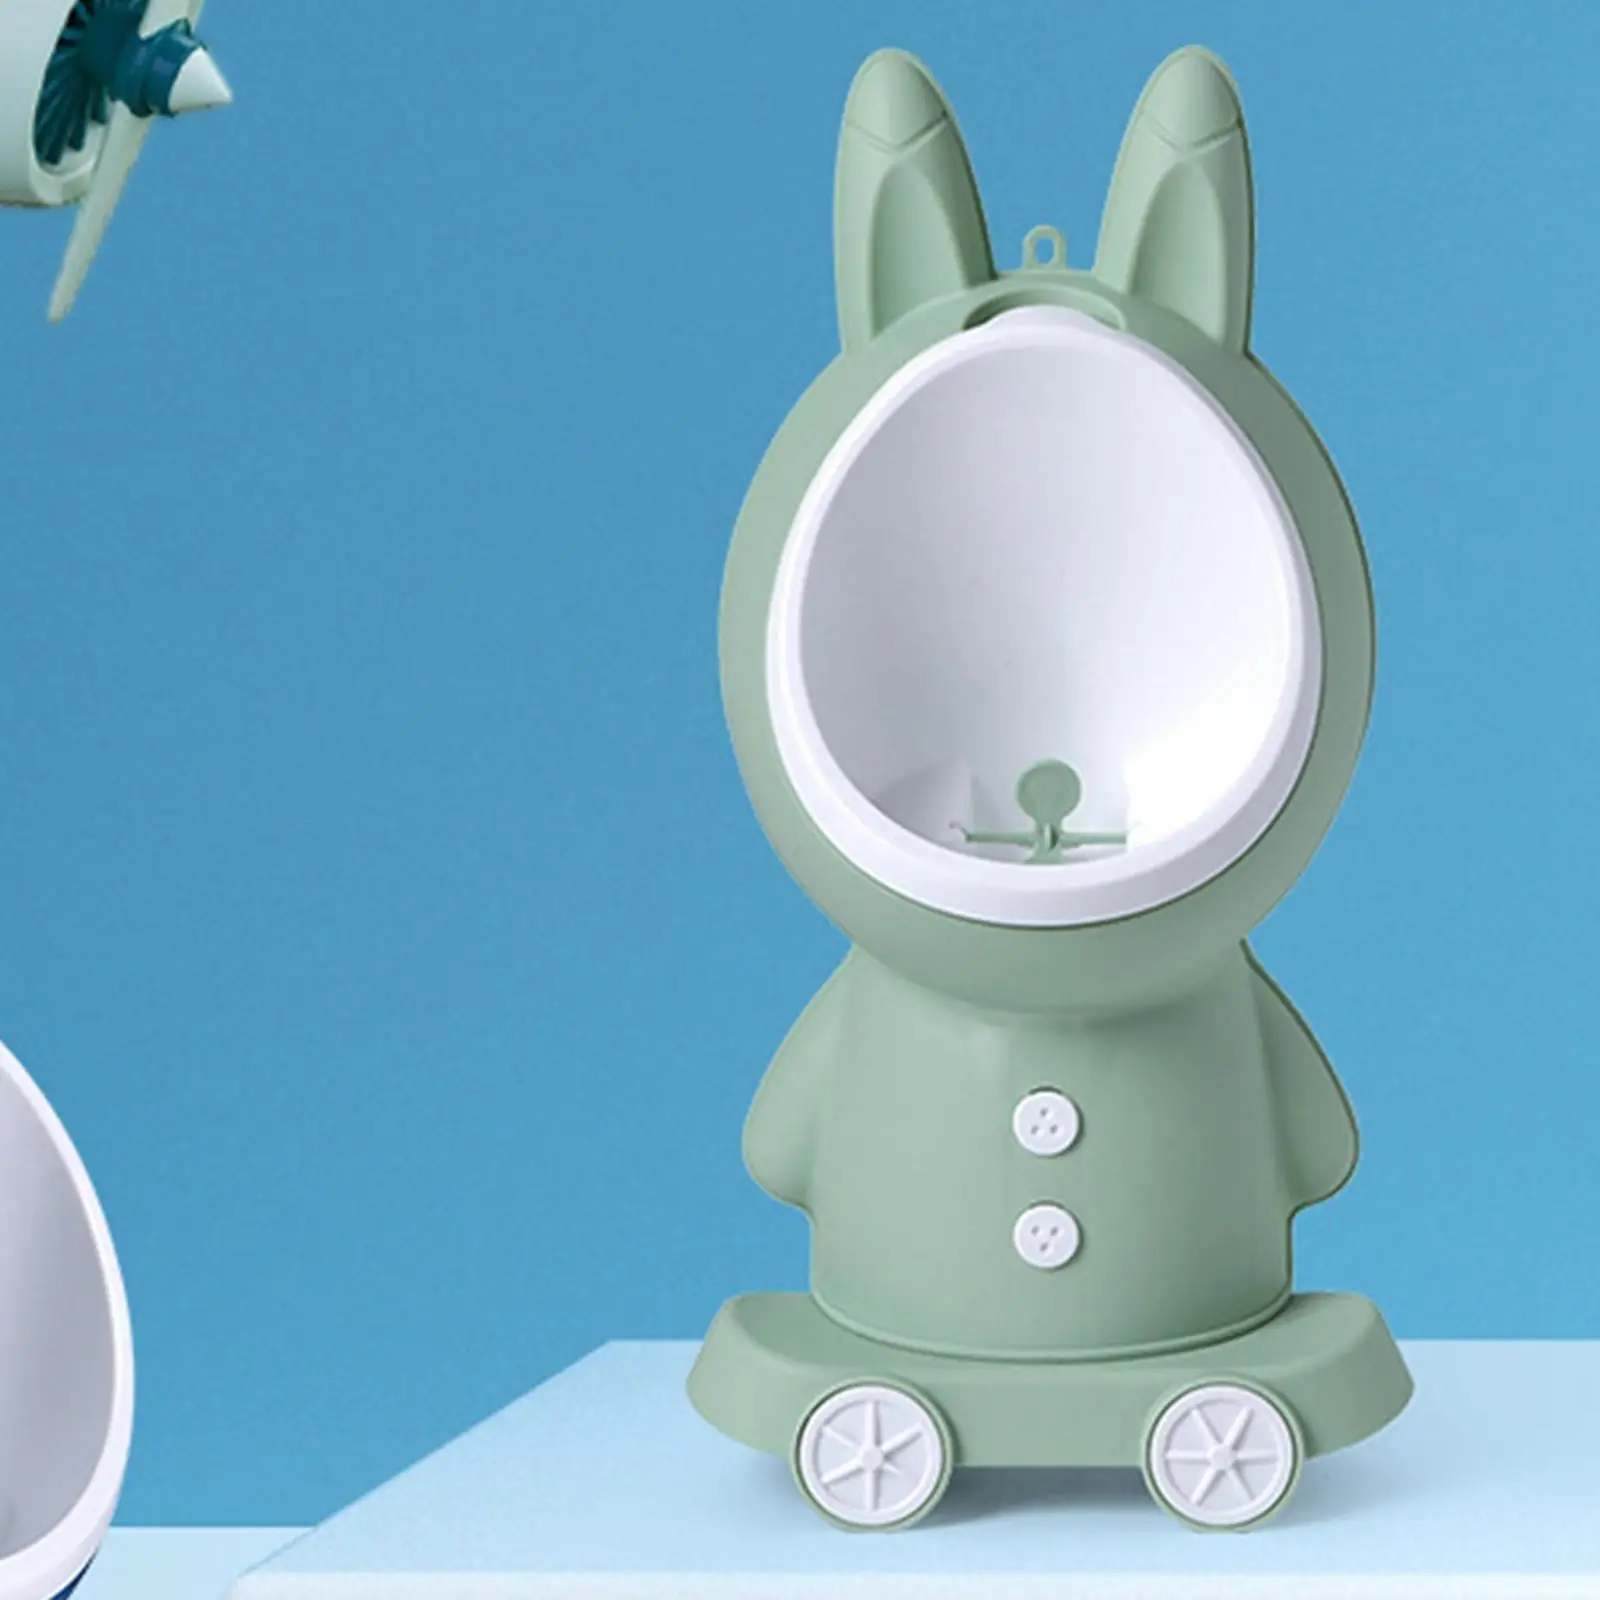 Potty Urinal with  for Toddler Boys, Pee Trainer for Children Urinal with Fun Sighting Target